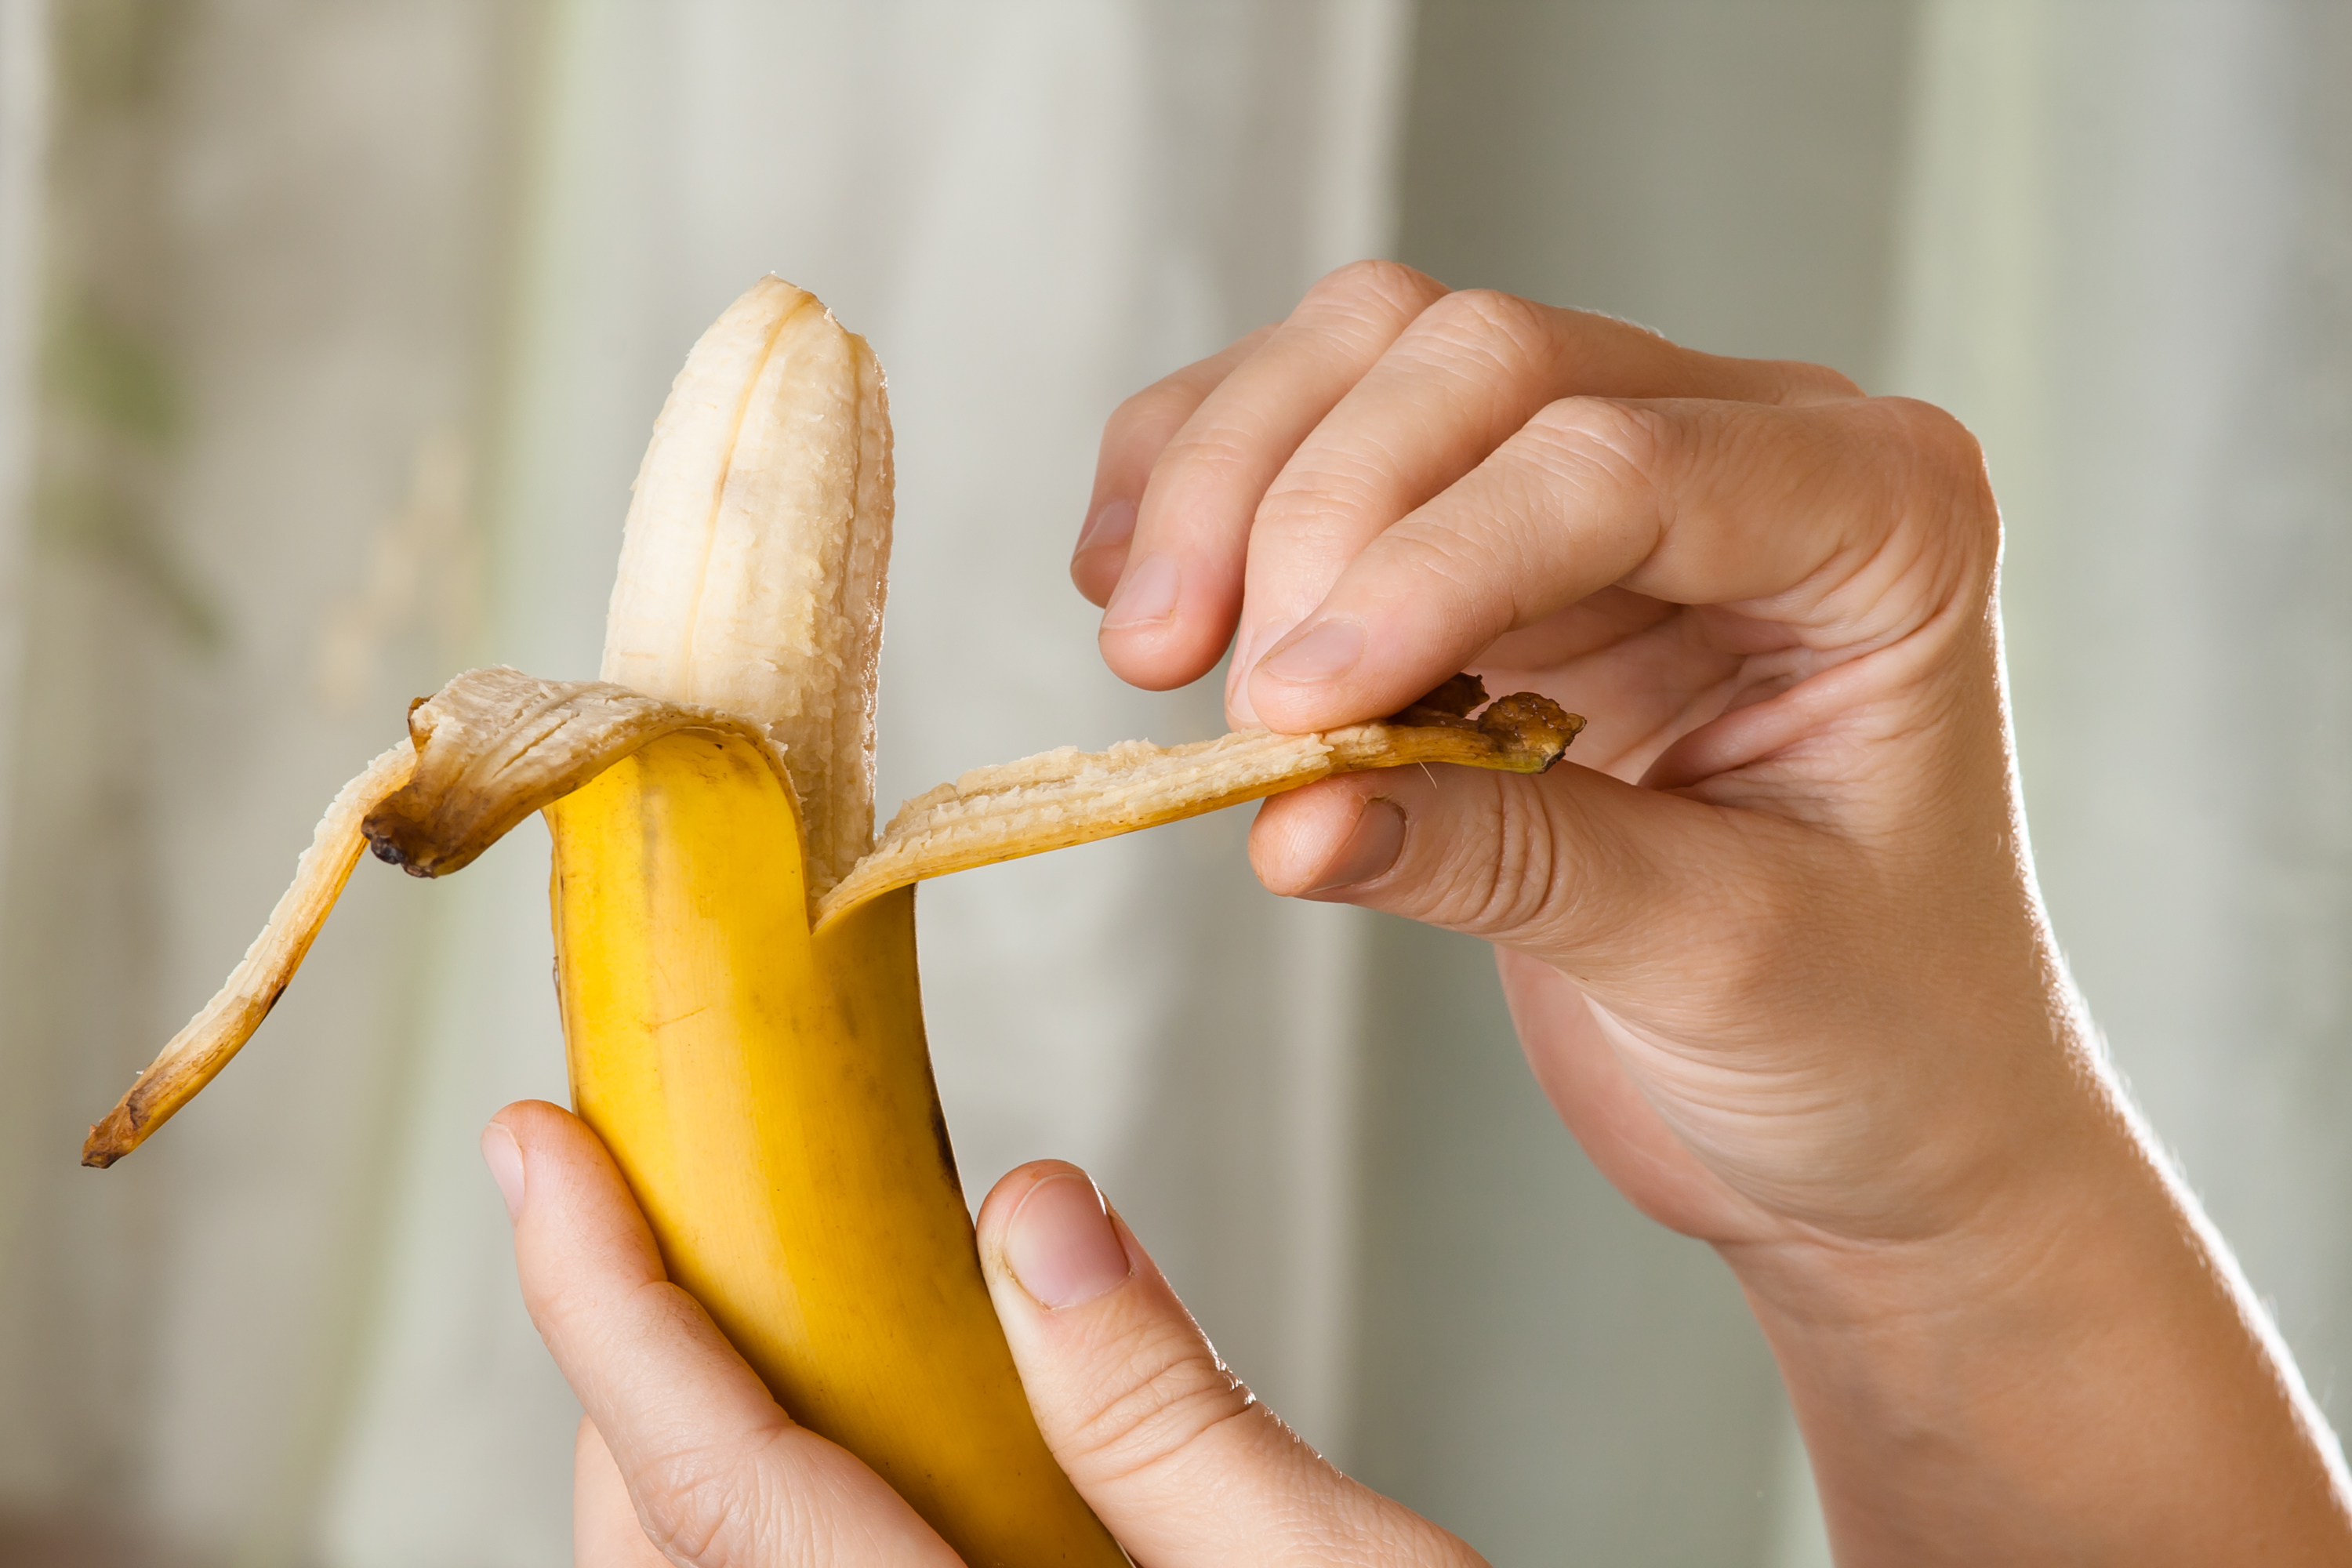 The Way You Eat Common Foods Will Reveal Whether You’re Shy or Outgoing peeling bananas